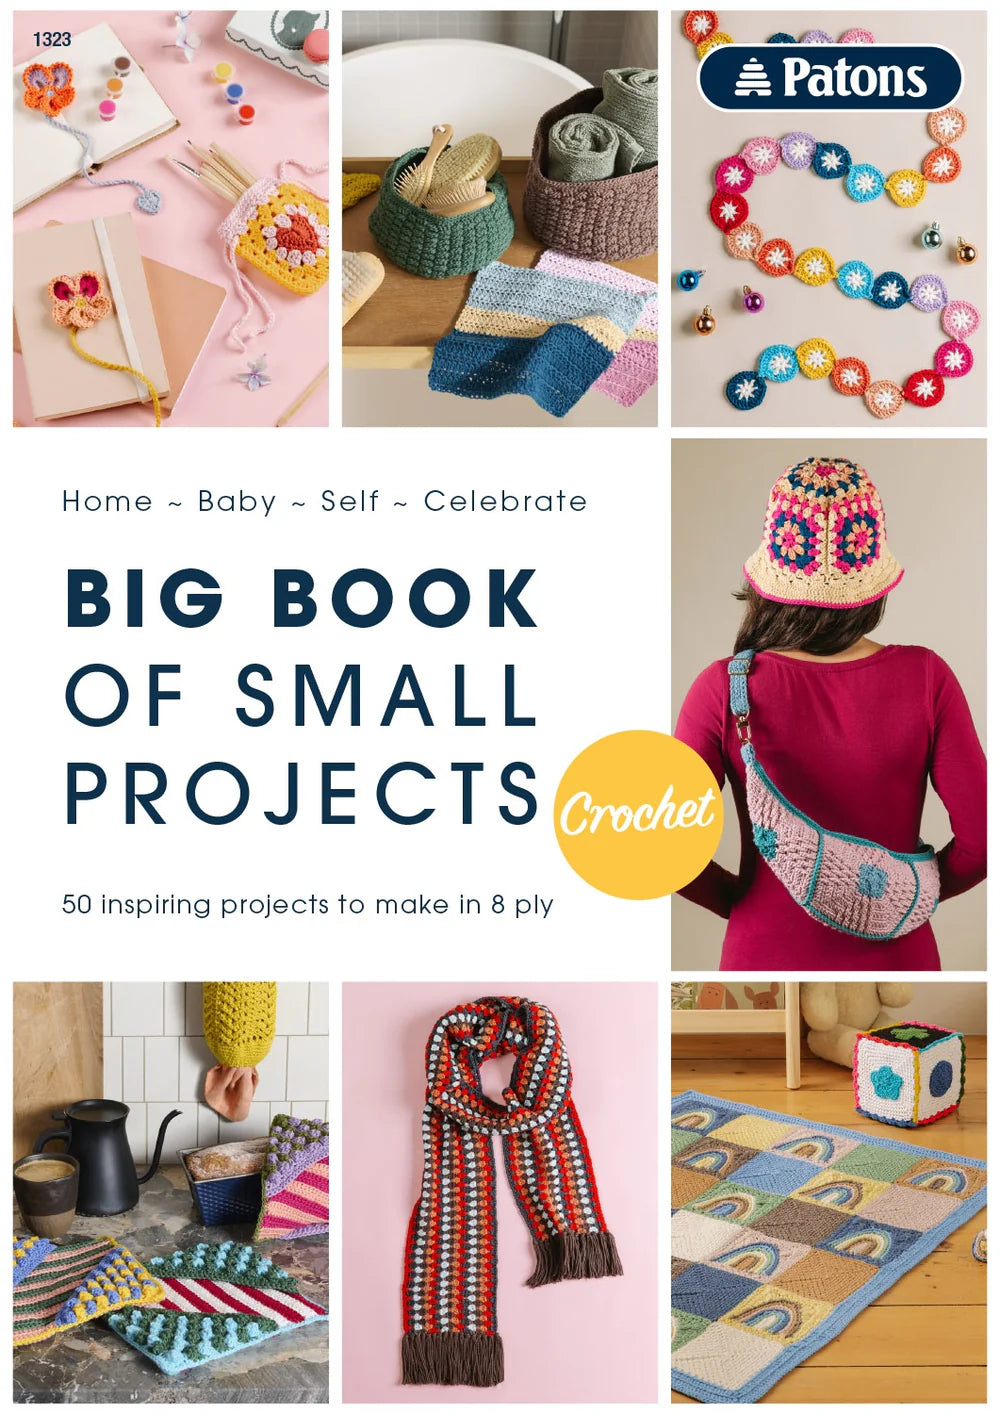 Patons Big Book of Small Projects Pattern Book - Crochet